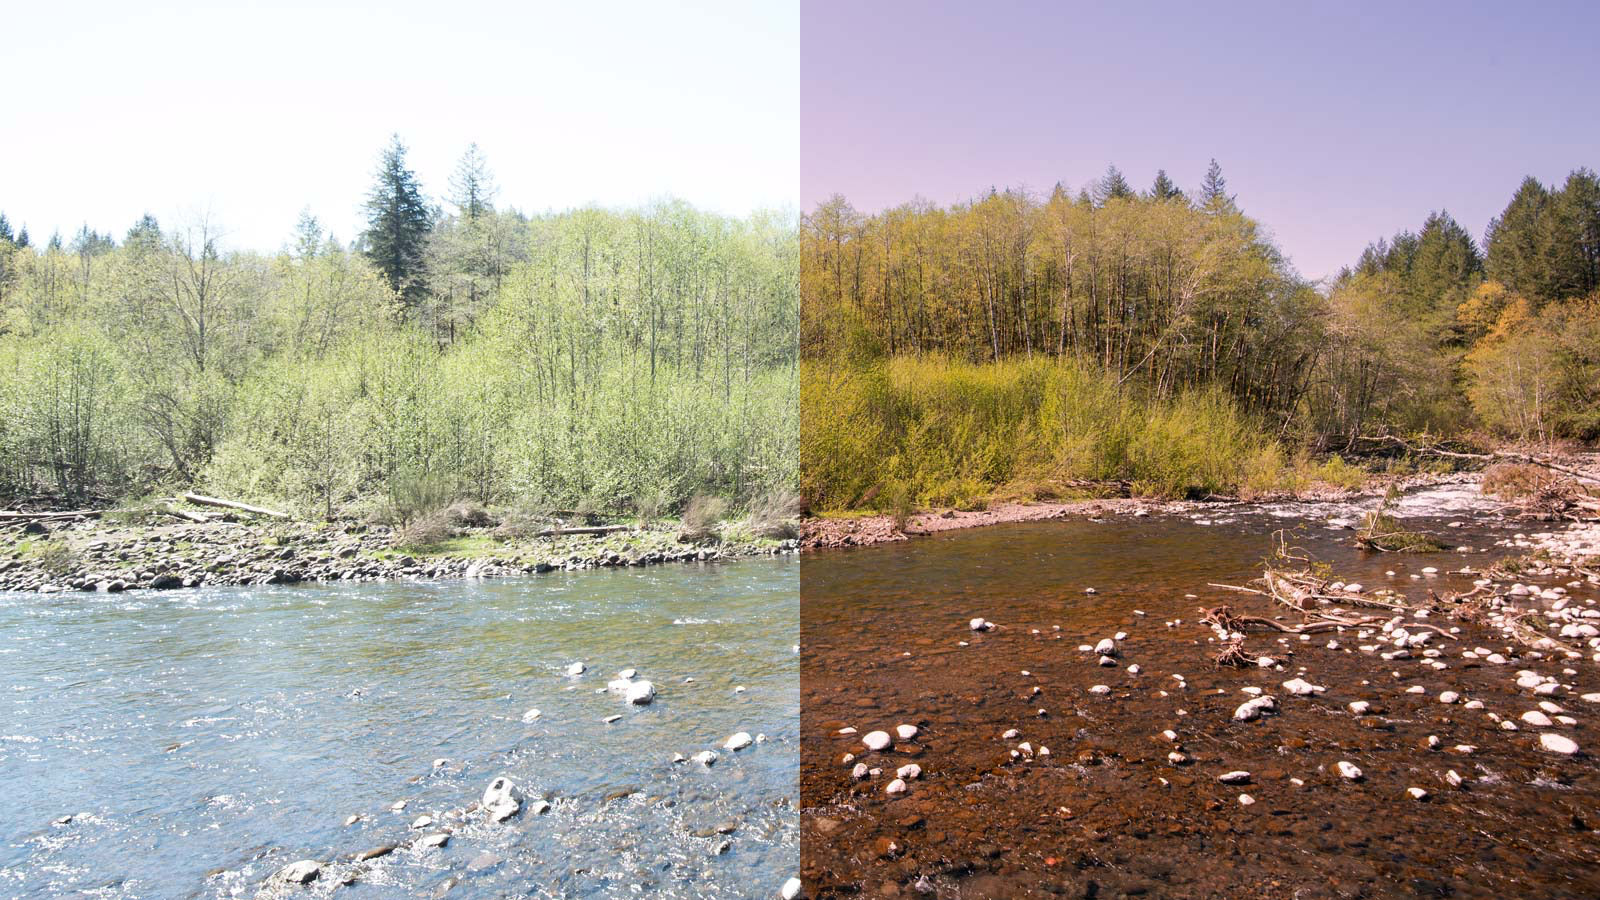 View of the water seen with and without the Emerald Green lens